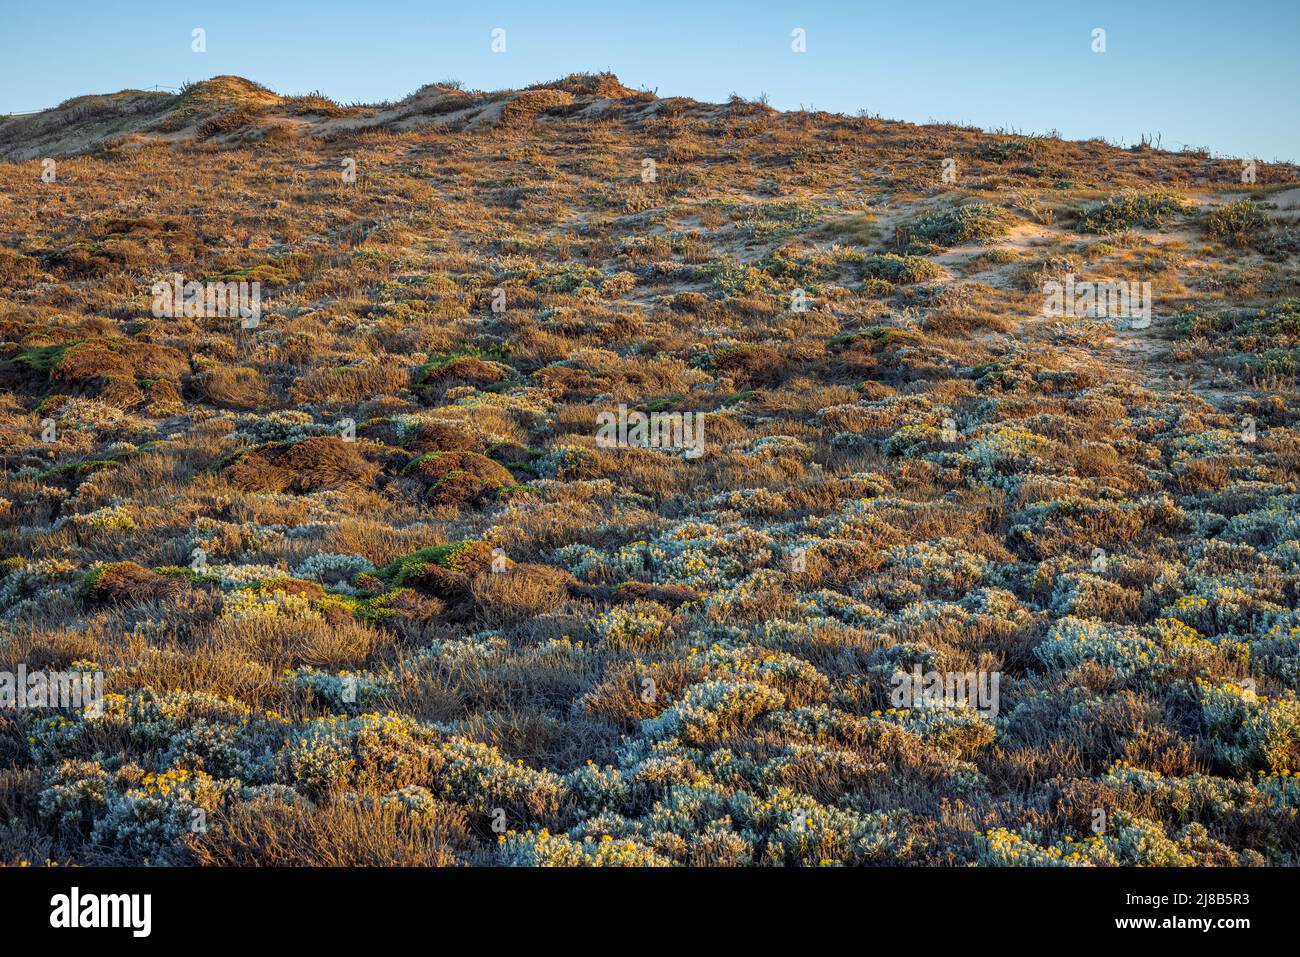 The various flora growing on a sand dune on the Central Coast of California Stock Photo